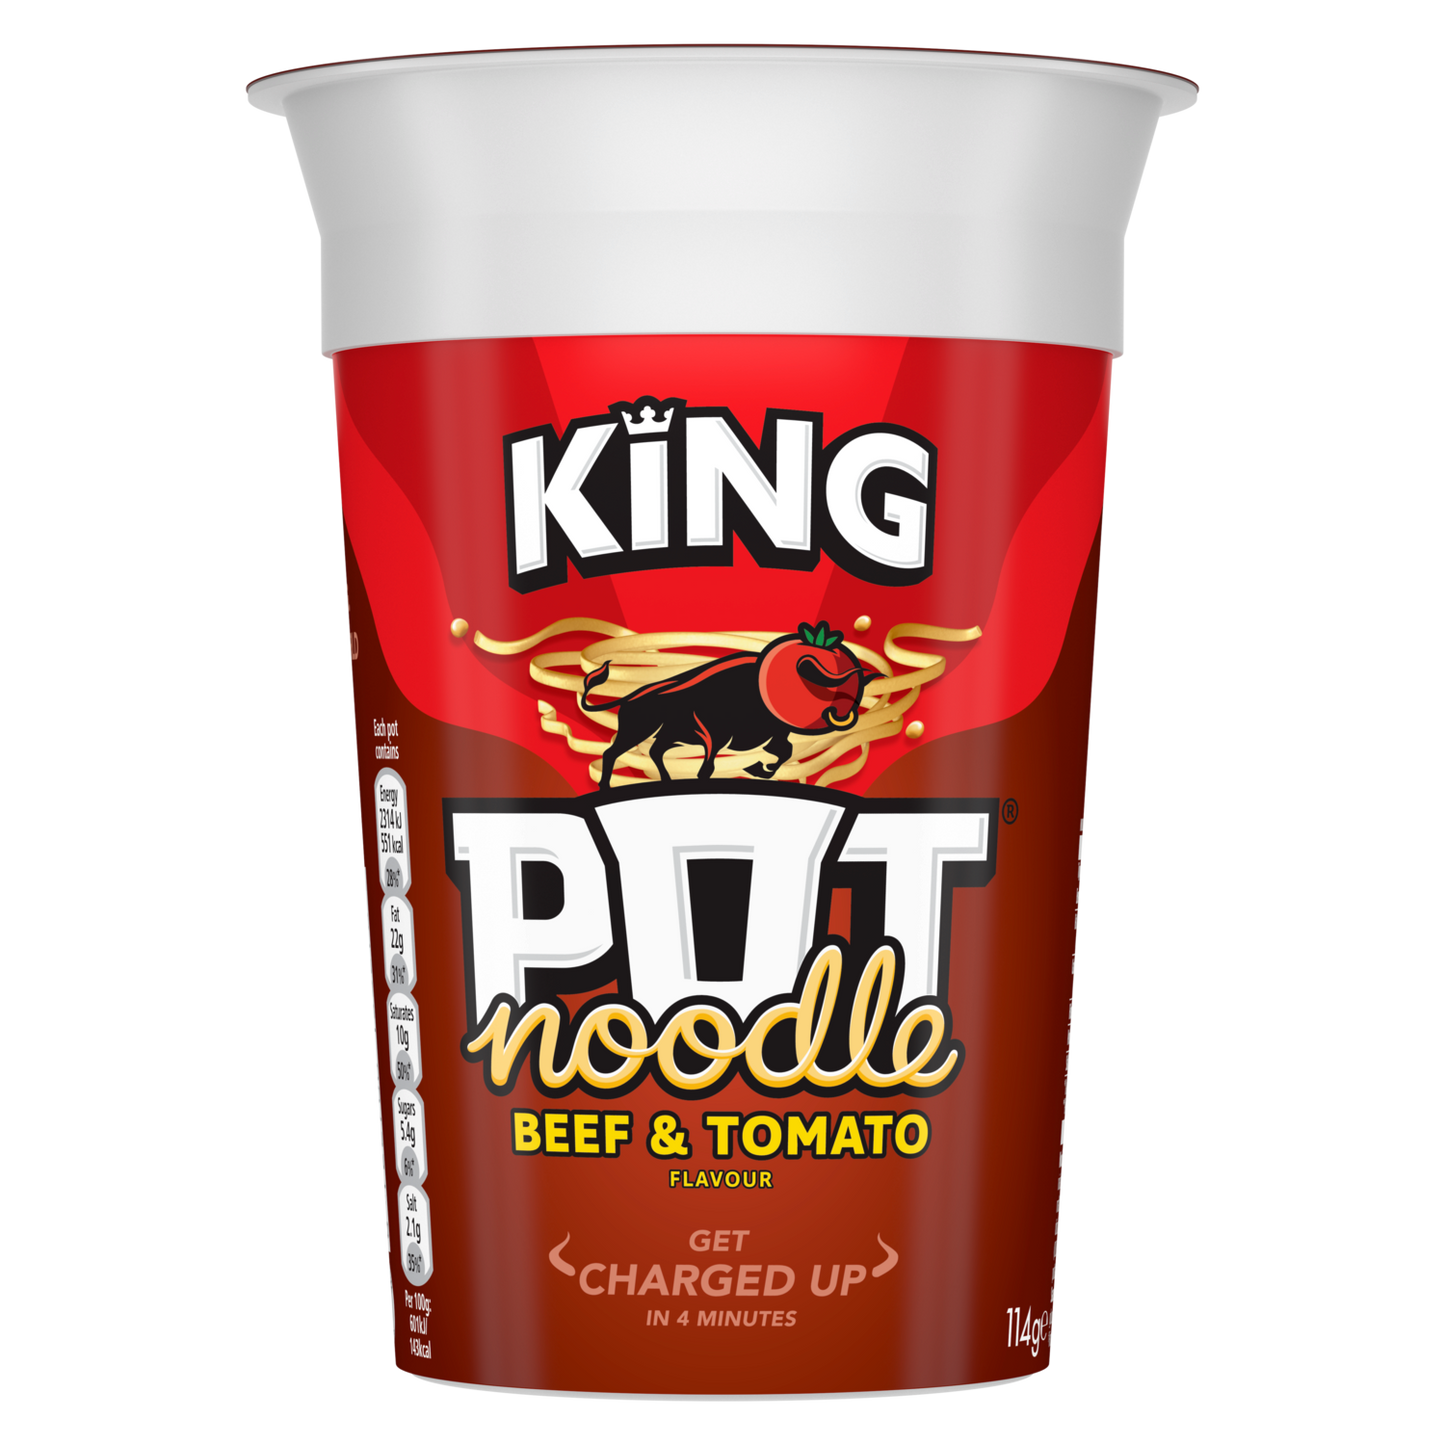 Pot Noodle King Beef & Tomato